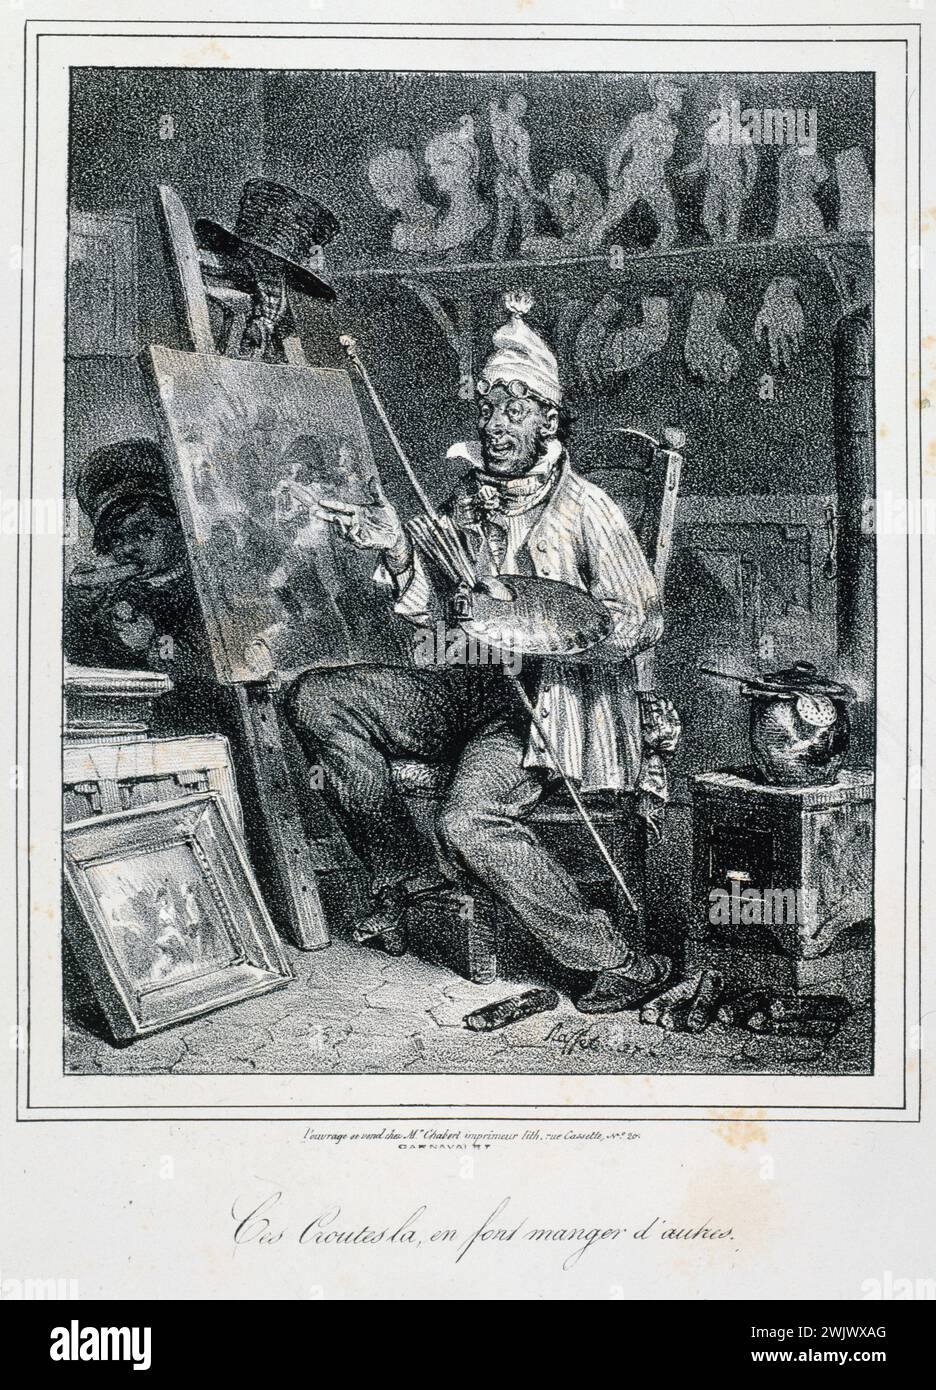 Denis-Auguste-Marie Raffet (1804-1860). 'These crusts make others eat.' Engraving. Paris, Carnavalet museum. Amateur artist, workshop, soldier, painter, first empire, caricature, engraving Stock Photo